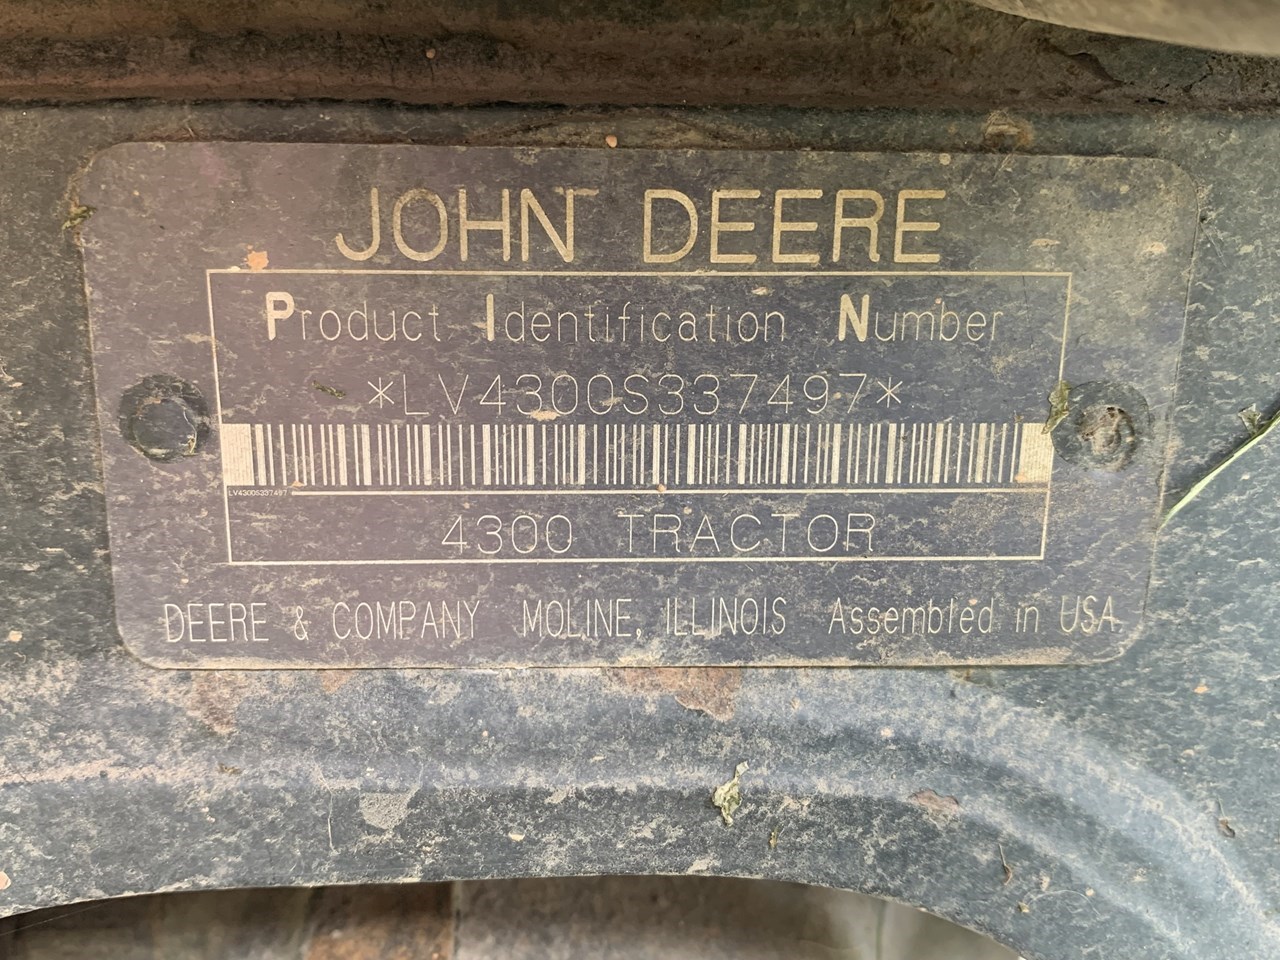 2000 John Deere 4300 Tractor - Compact Utility For Sale